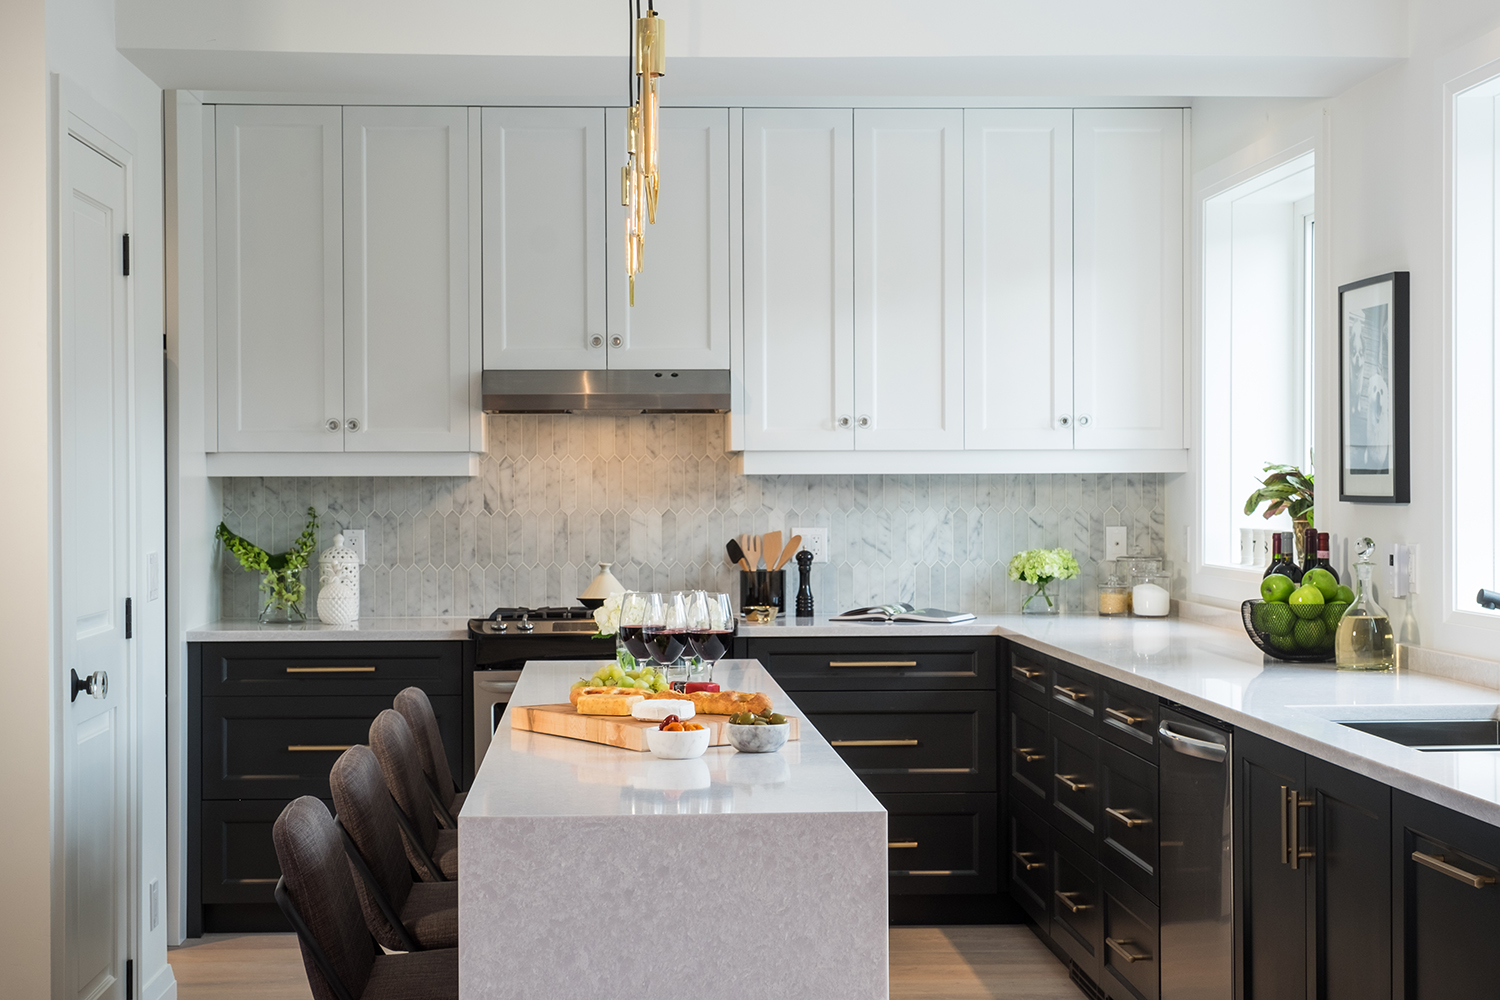 Modern kitchen with white upper cabinetry and black lower cabinets.